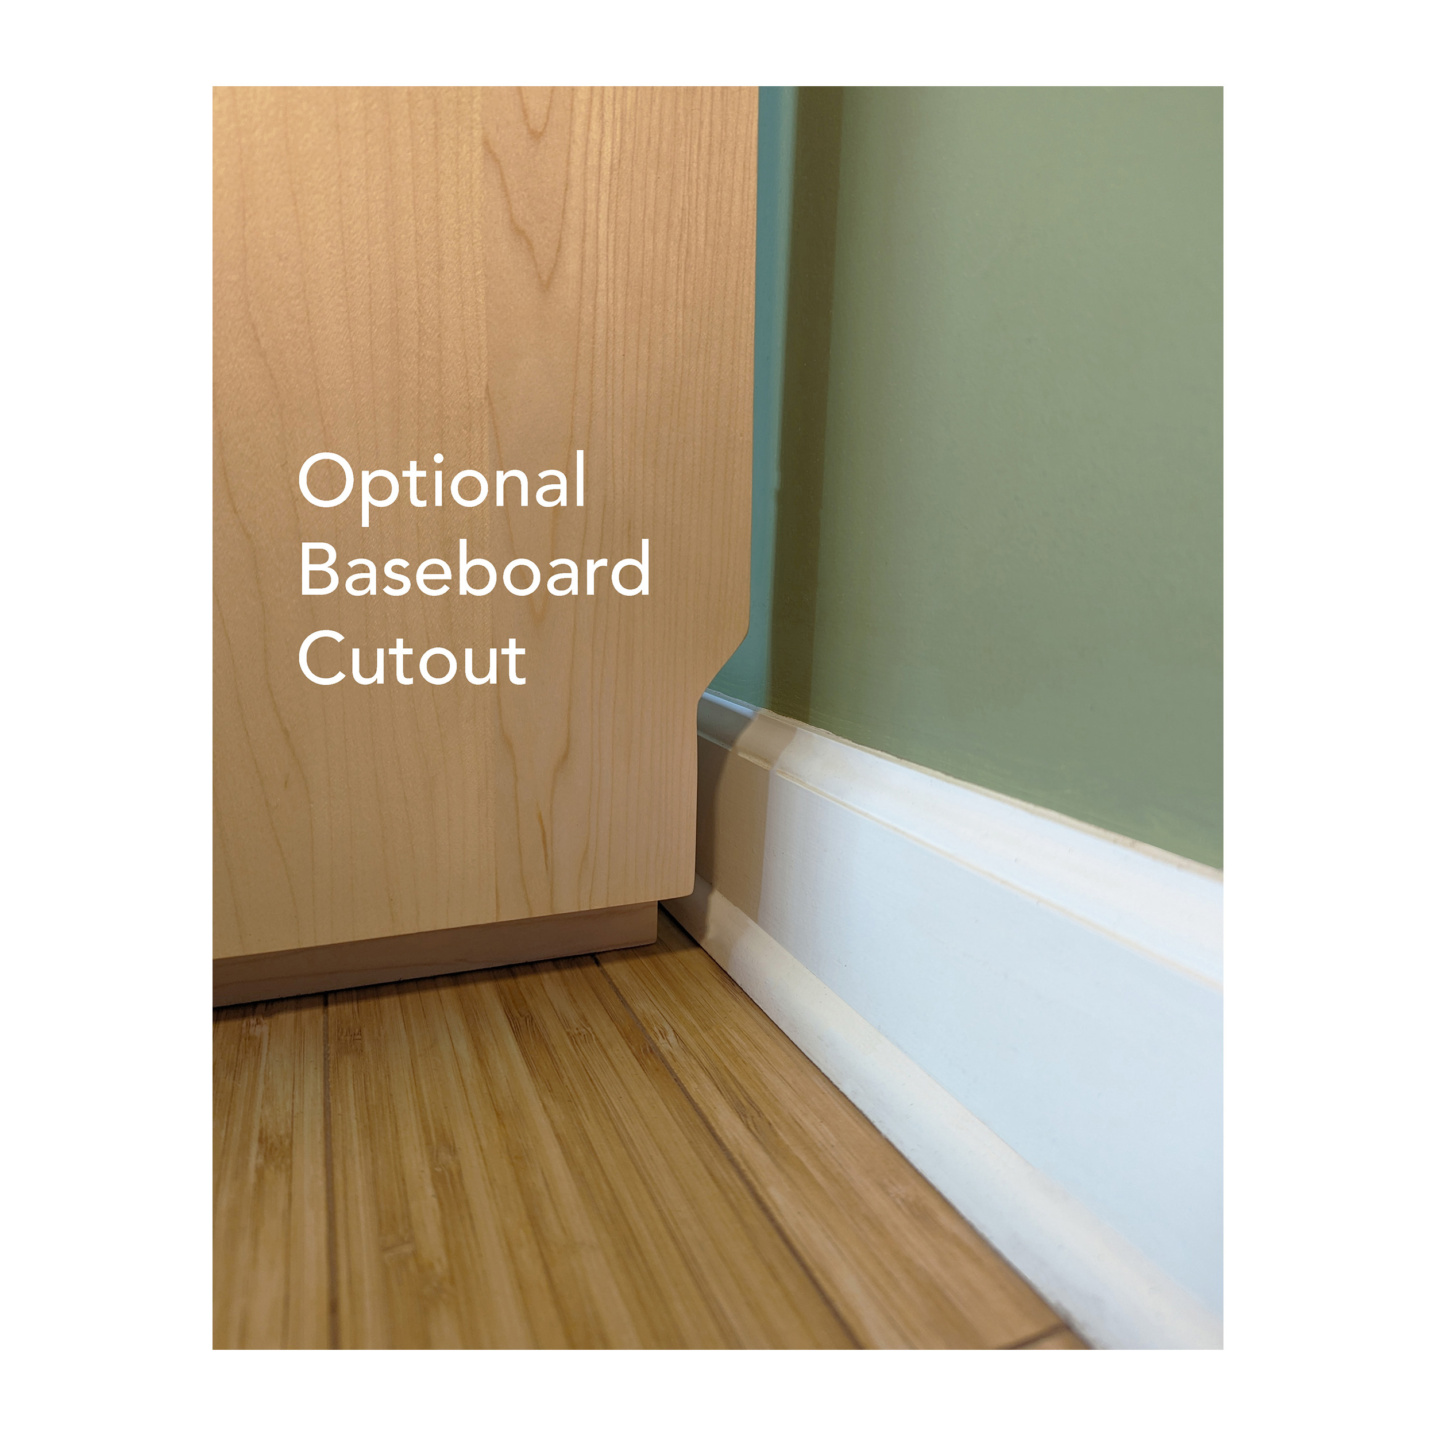 Cutout in a bookshelf for the baseboards